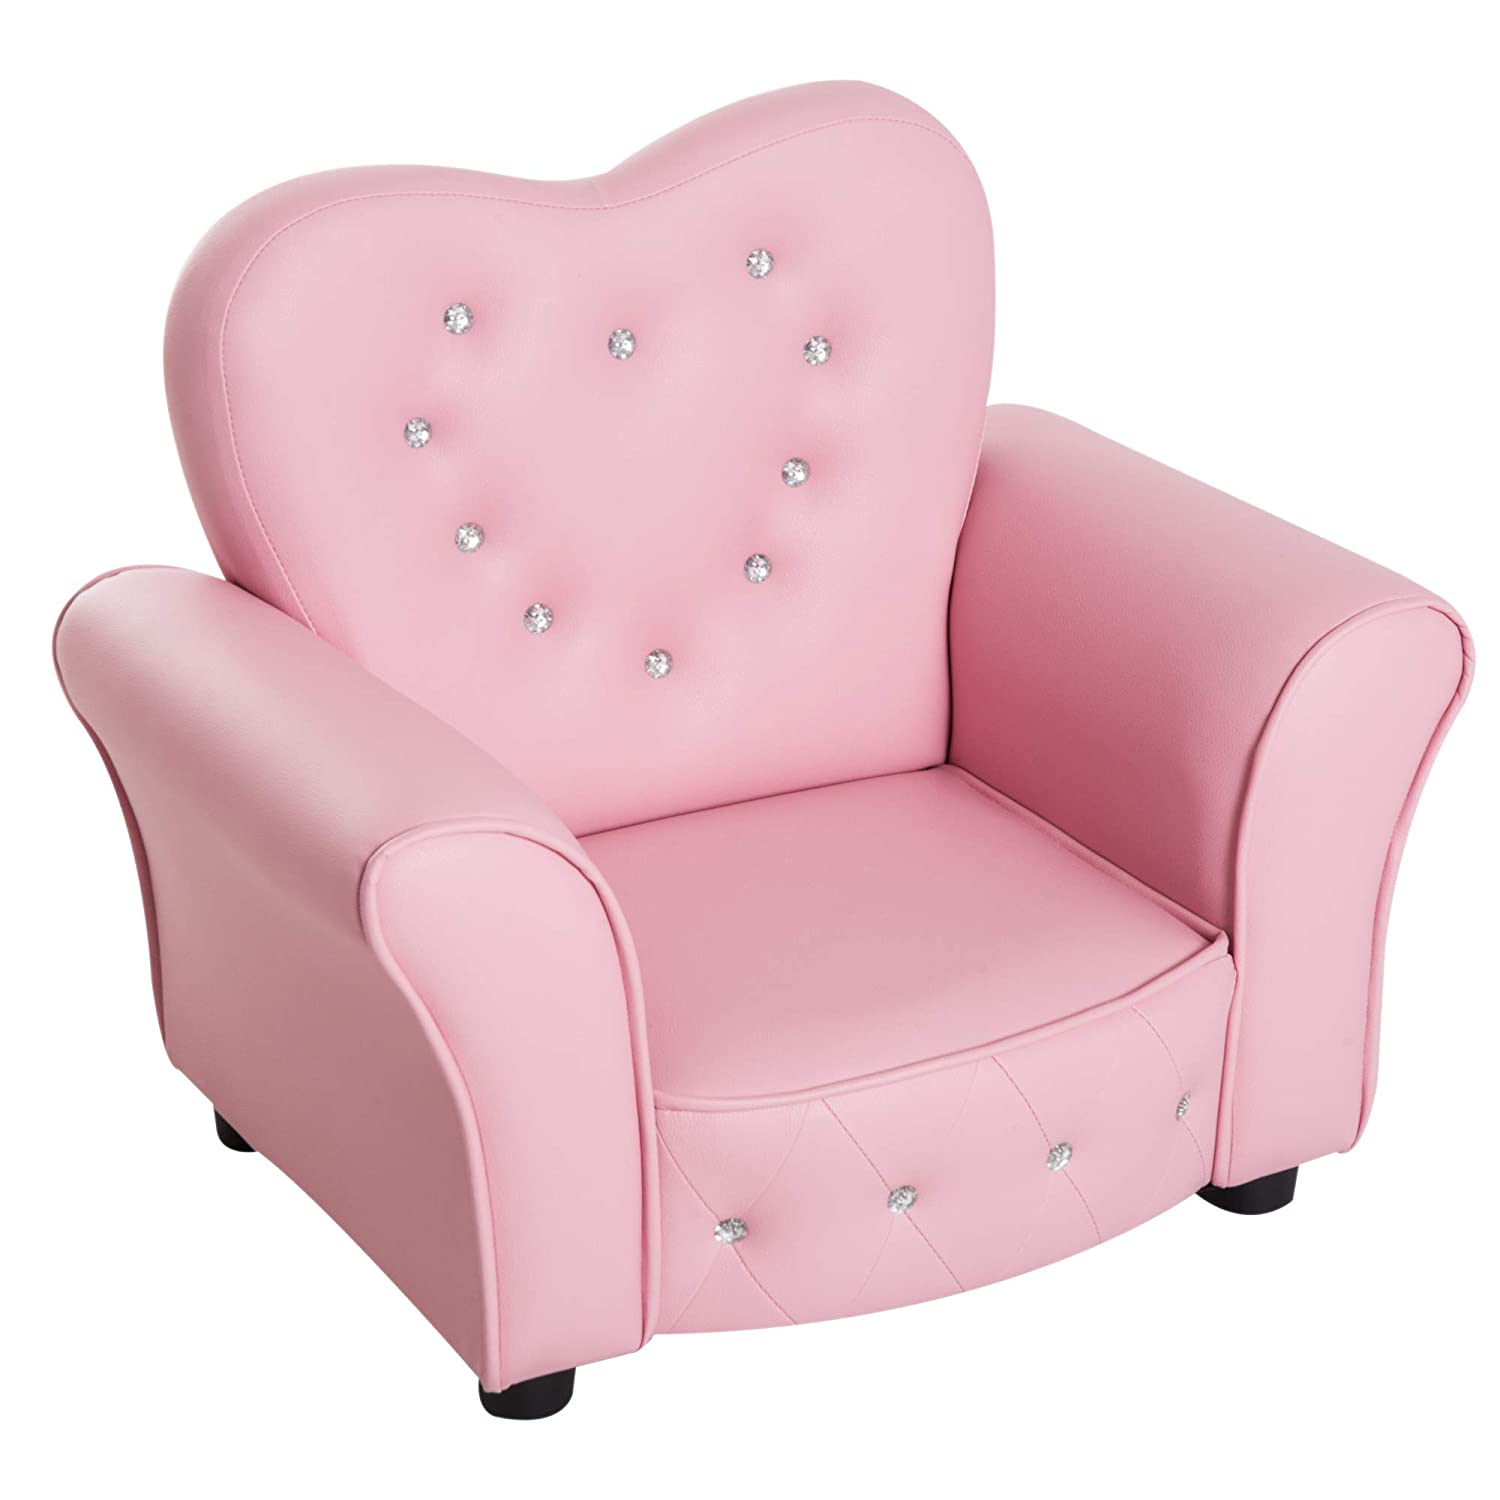 9 Best Princess Chair for Toddlers 2023 - Buying Guide 7